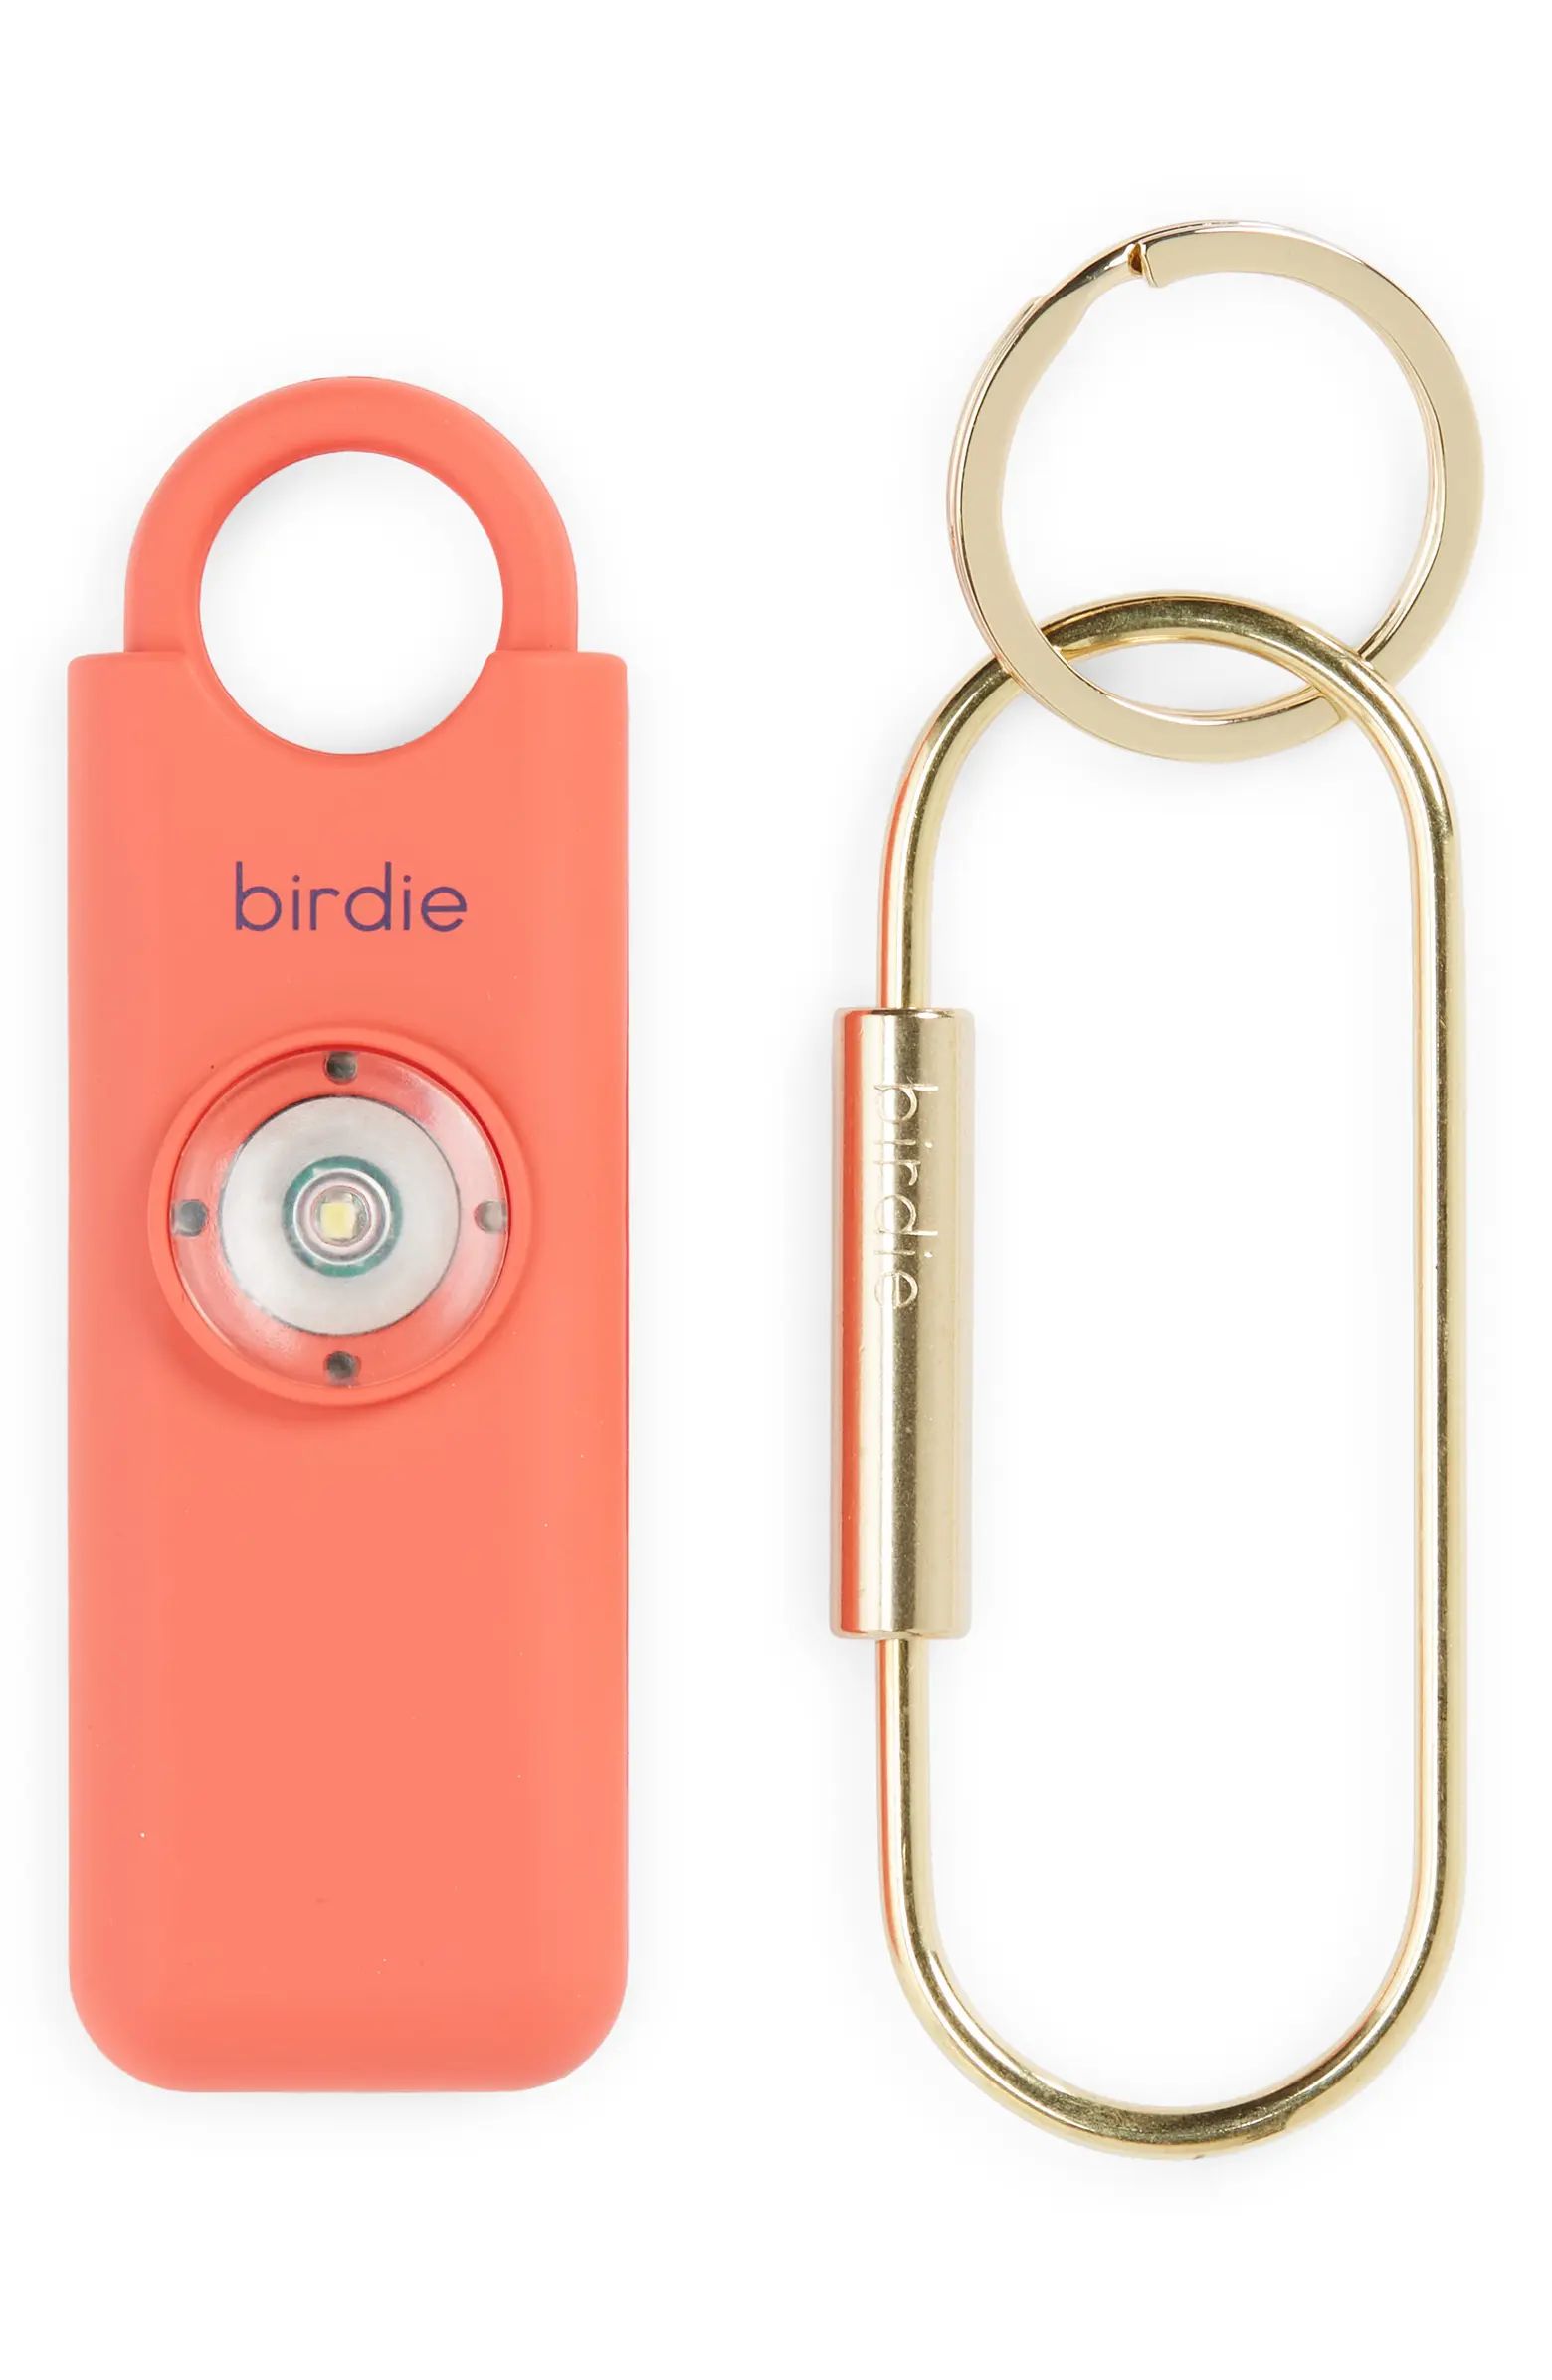 She's Birdie Personal Safety Alarm | Nordstrom